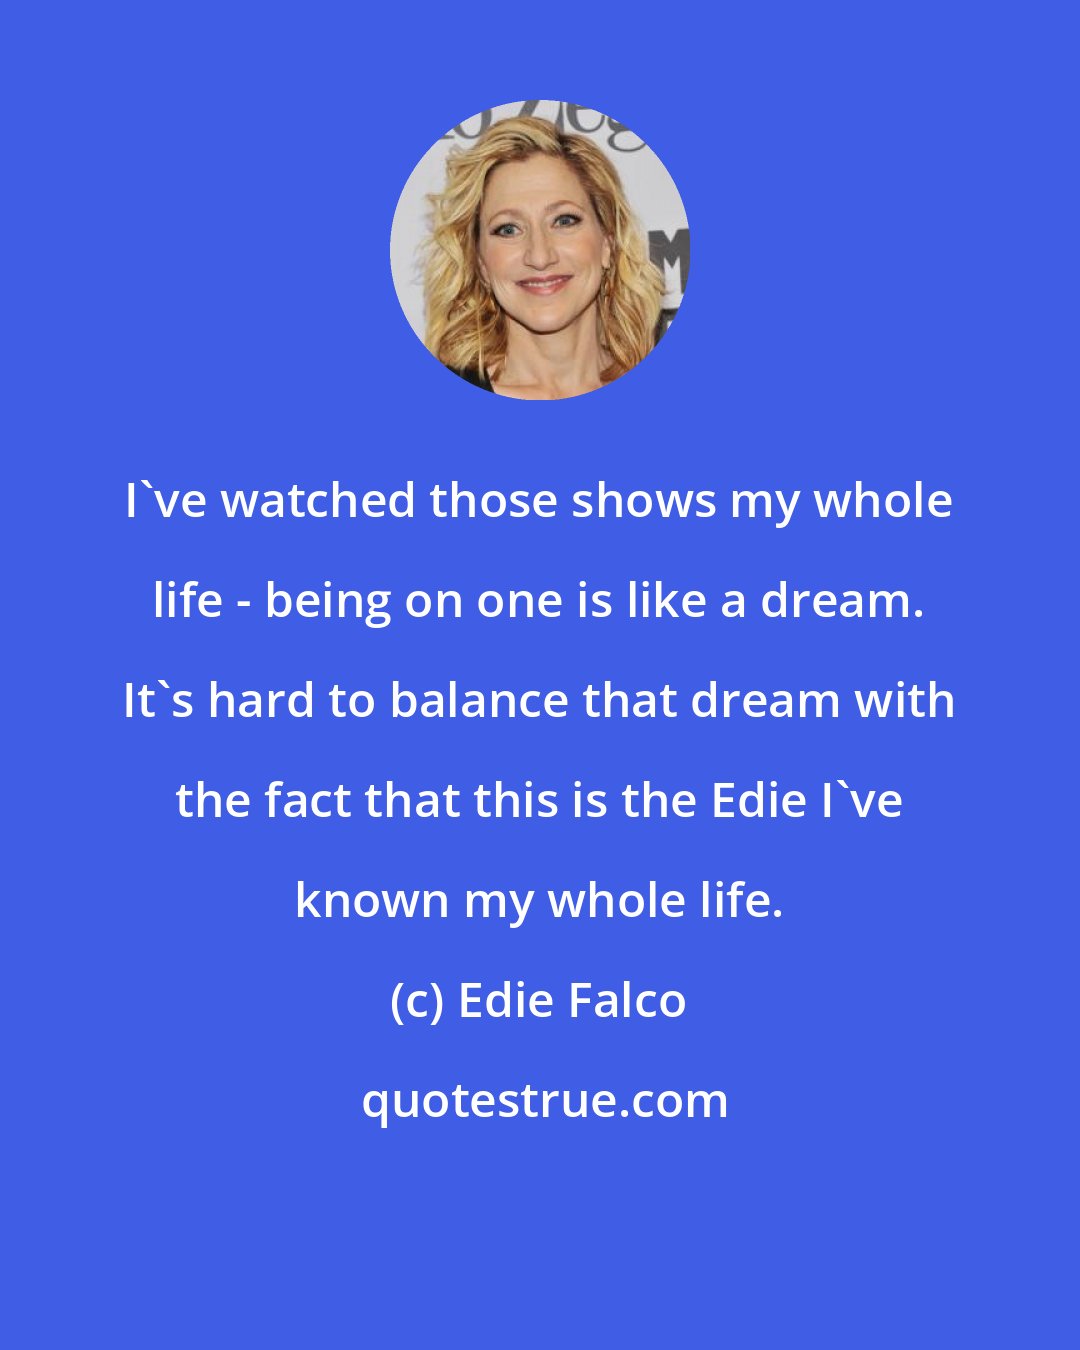 Edie Falco: I've watched those shows my whole life - being on one is like a dream. It's hard to balance that dream with the fact that this is the Edie I've known my whole life.